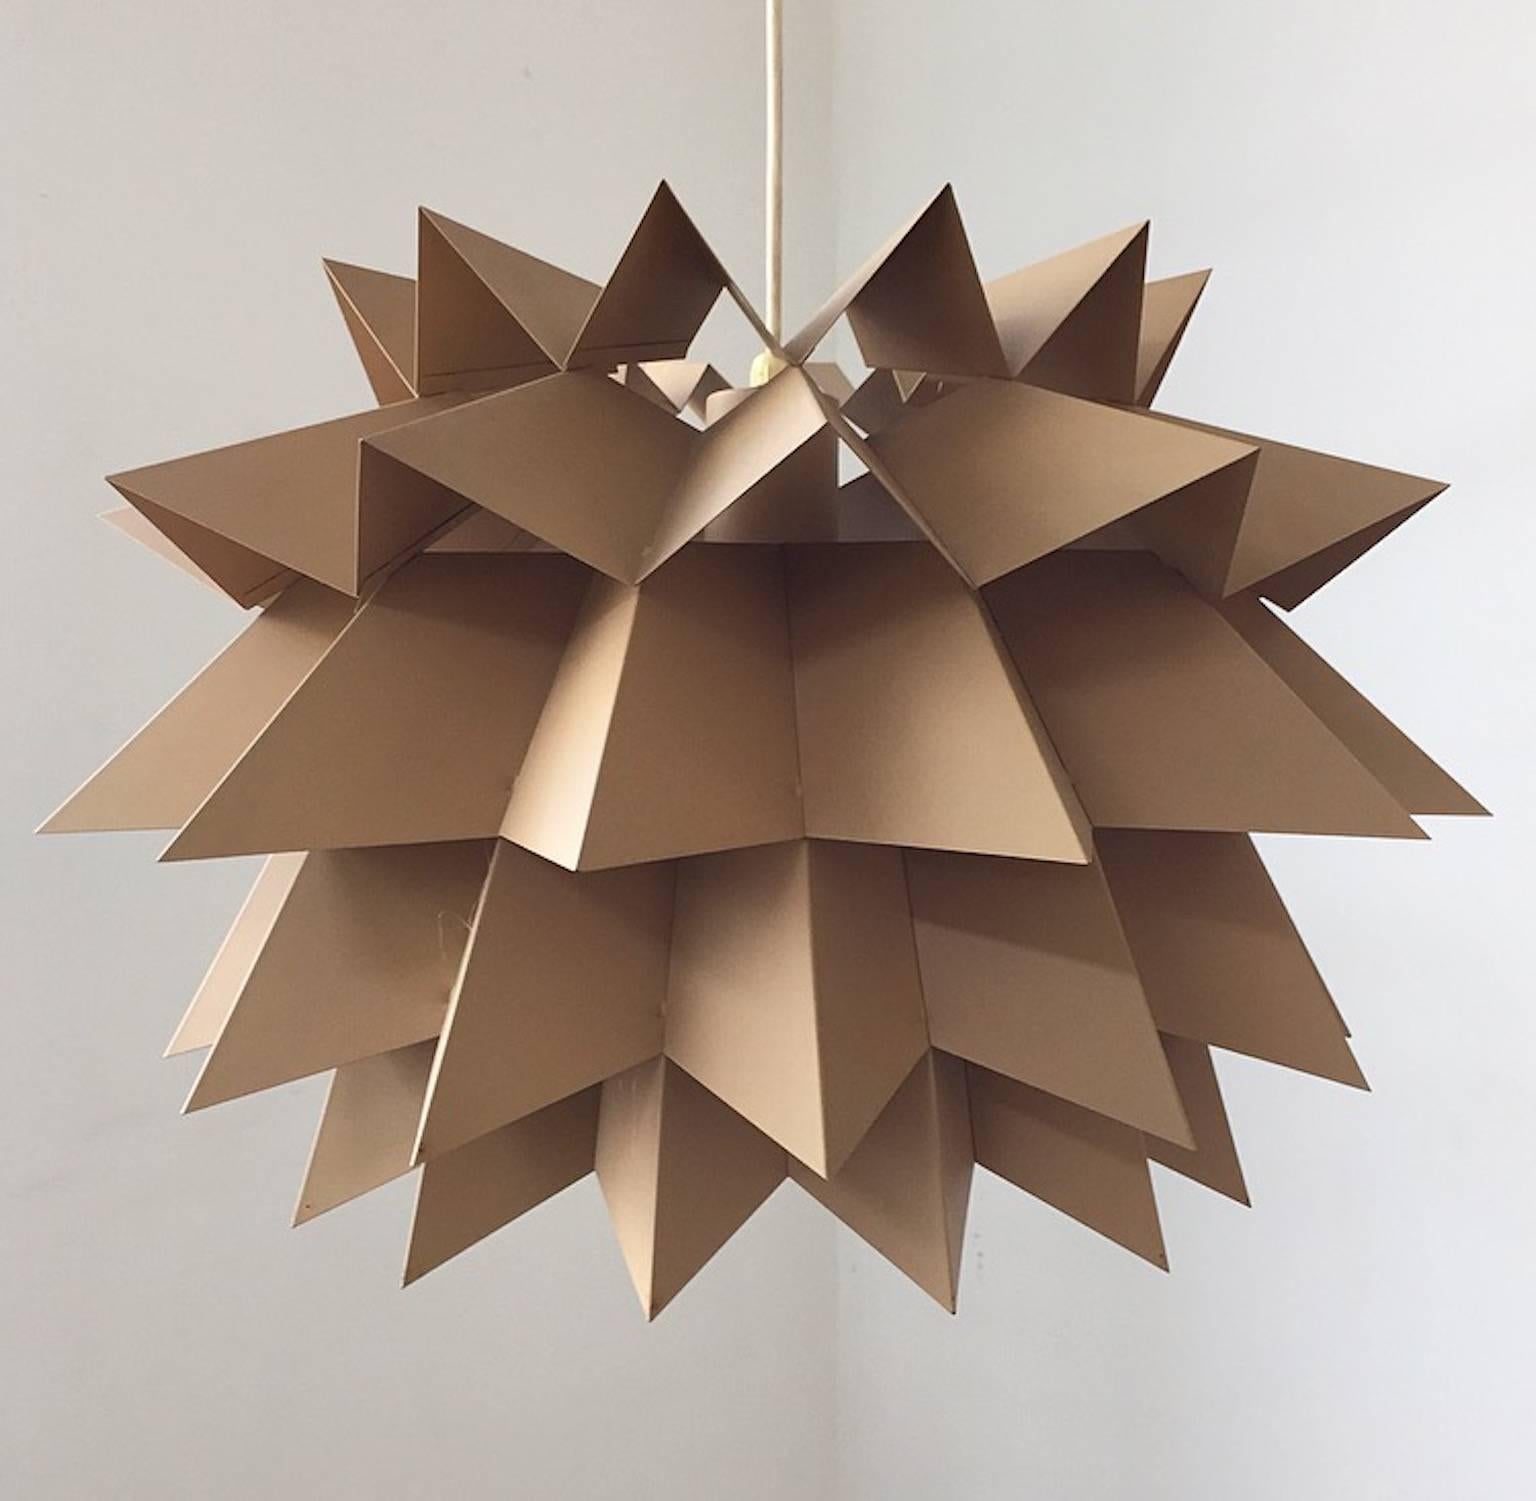 The star light (sometimes referred to as the Sydney light) was designed by Anton Fogh Holm & Alfred J Andersen for Nordisk Solar Compagni in the late 1960s.

This amazing and absolute mint condition design piece will be an eye-catcher in any home